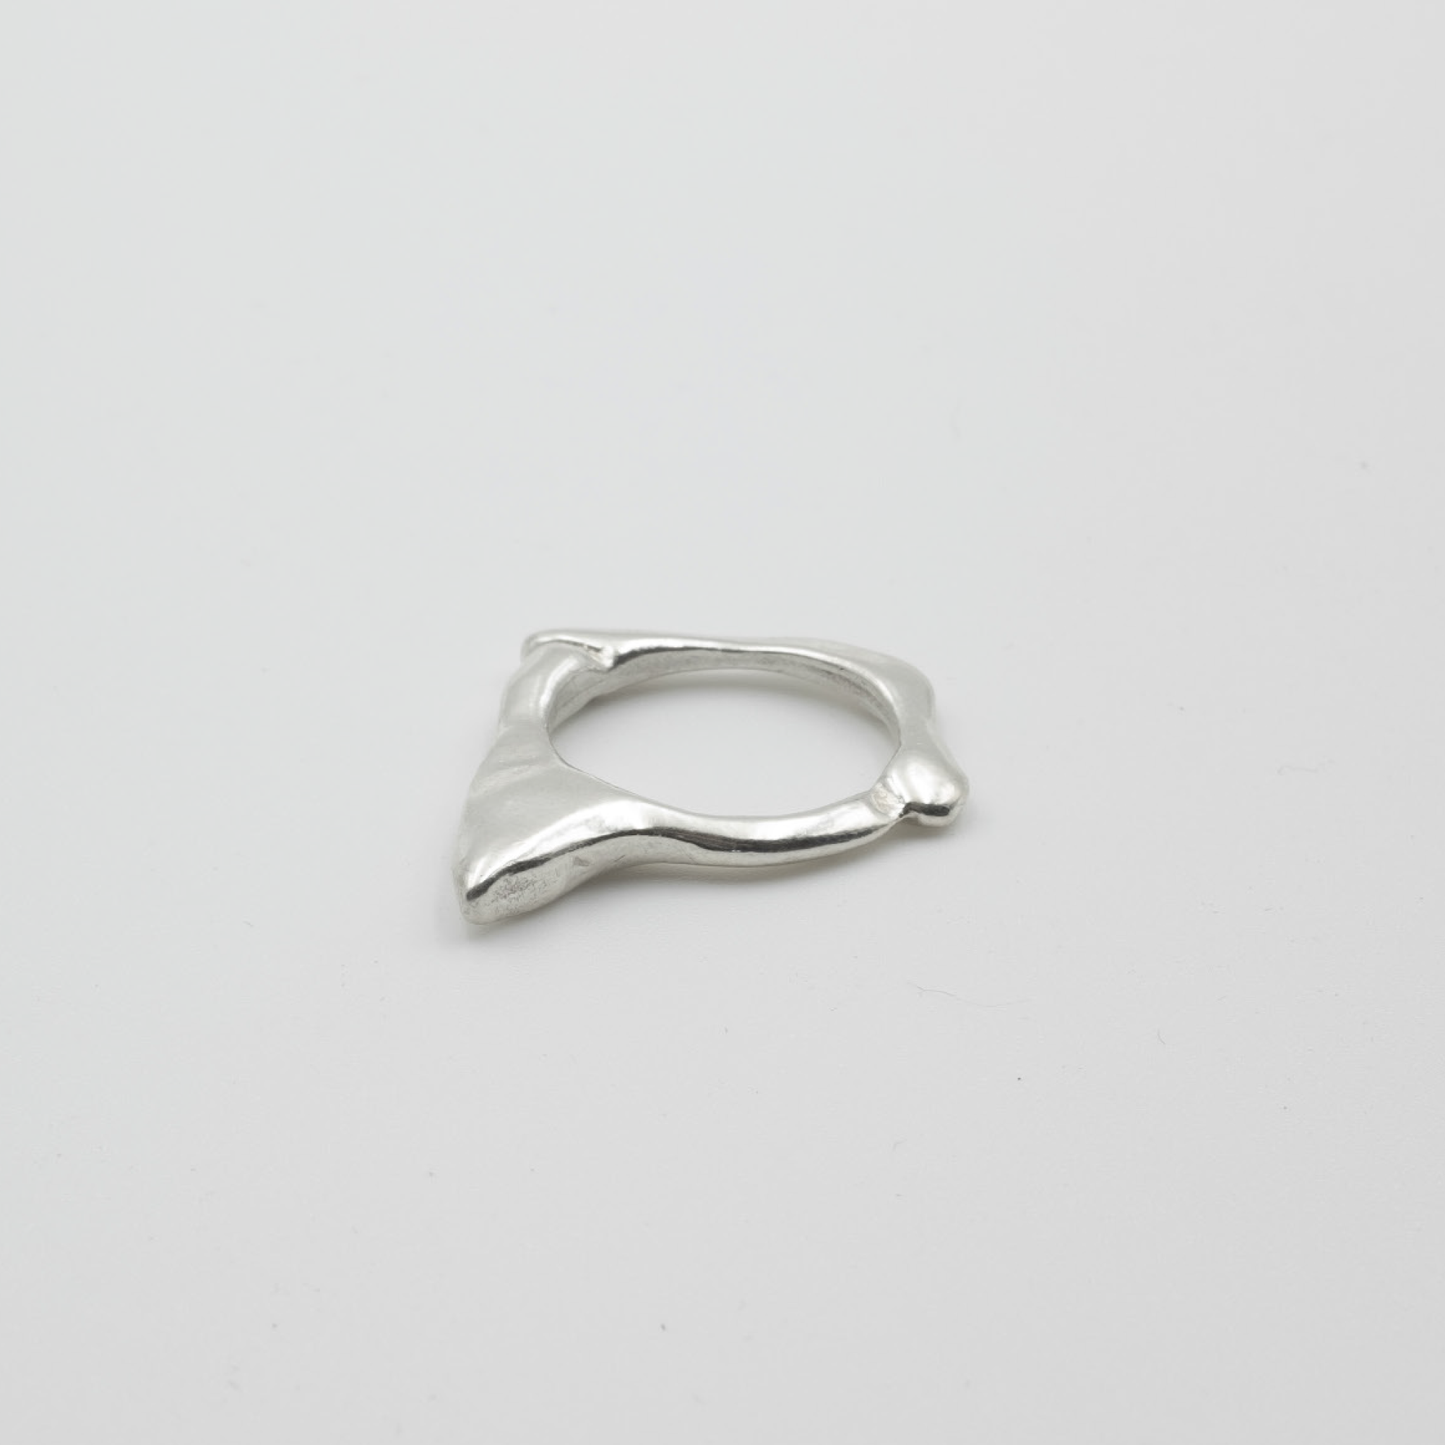 T1 - SHARK TOOTH RING